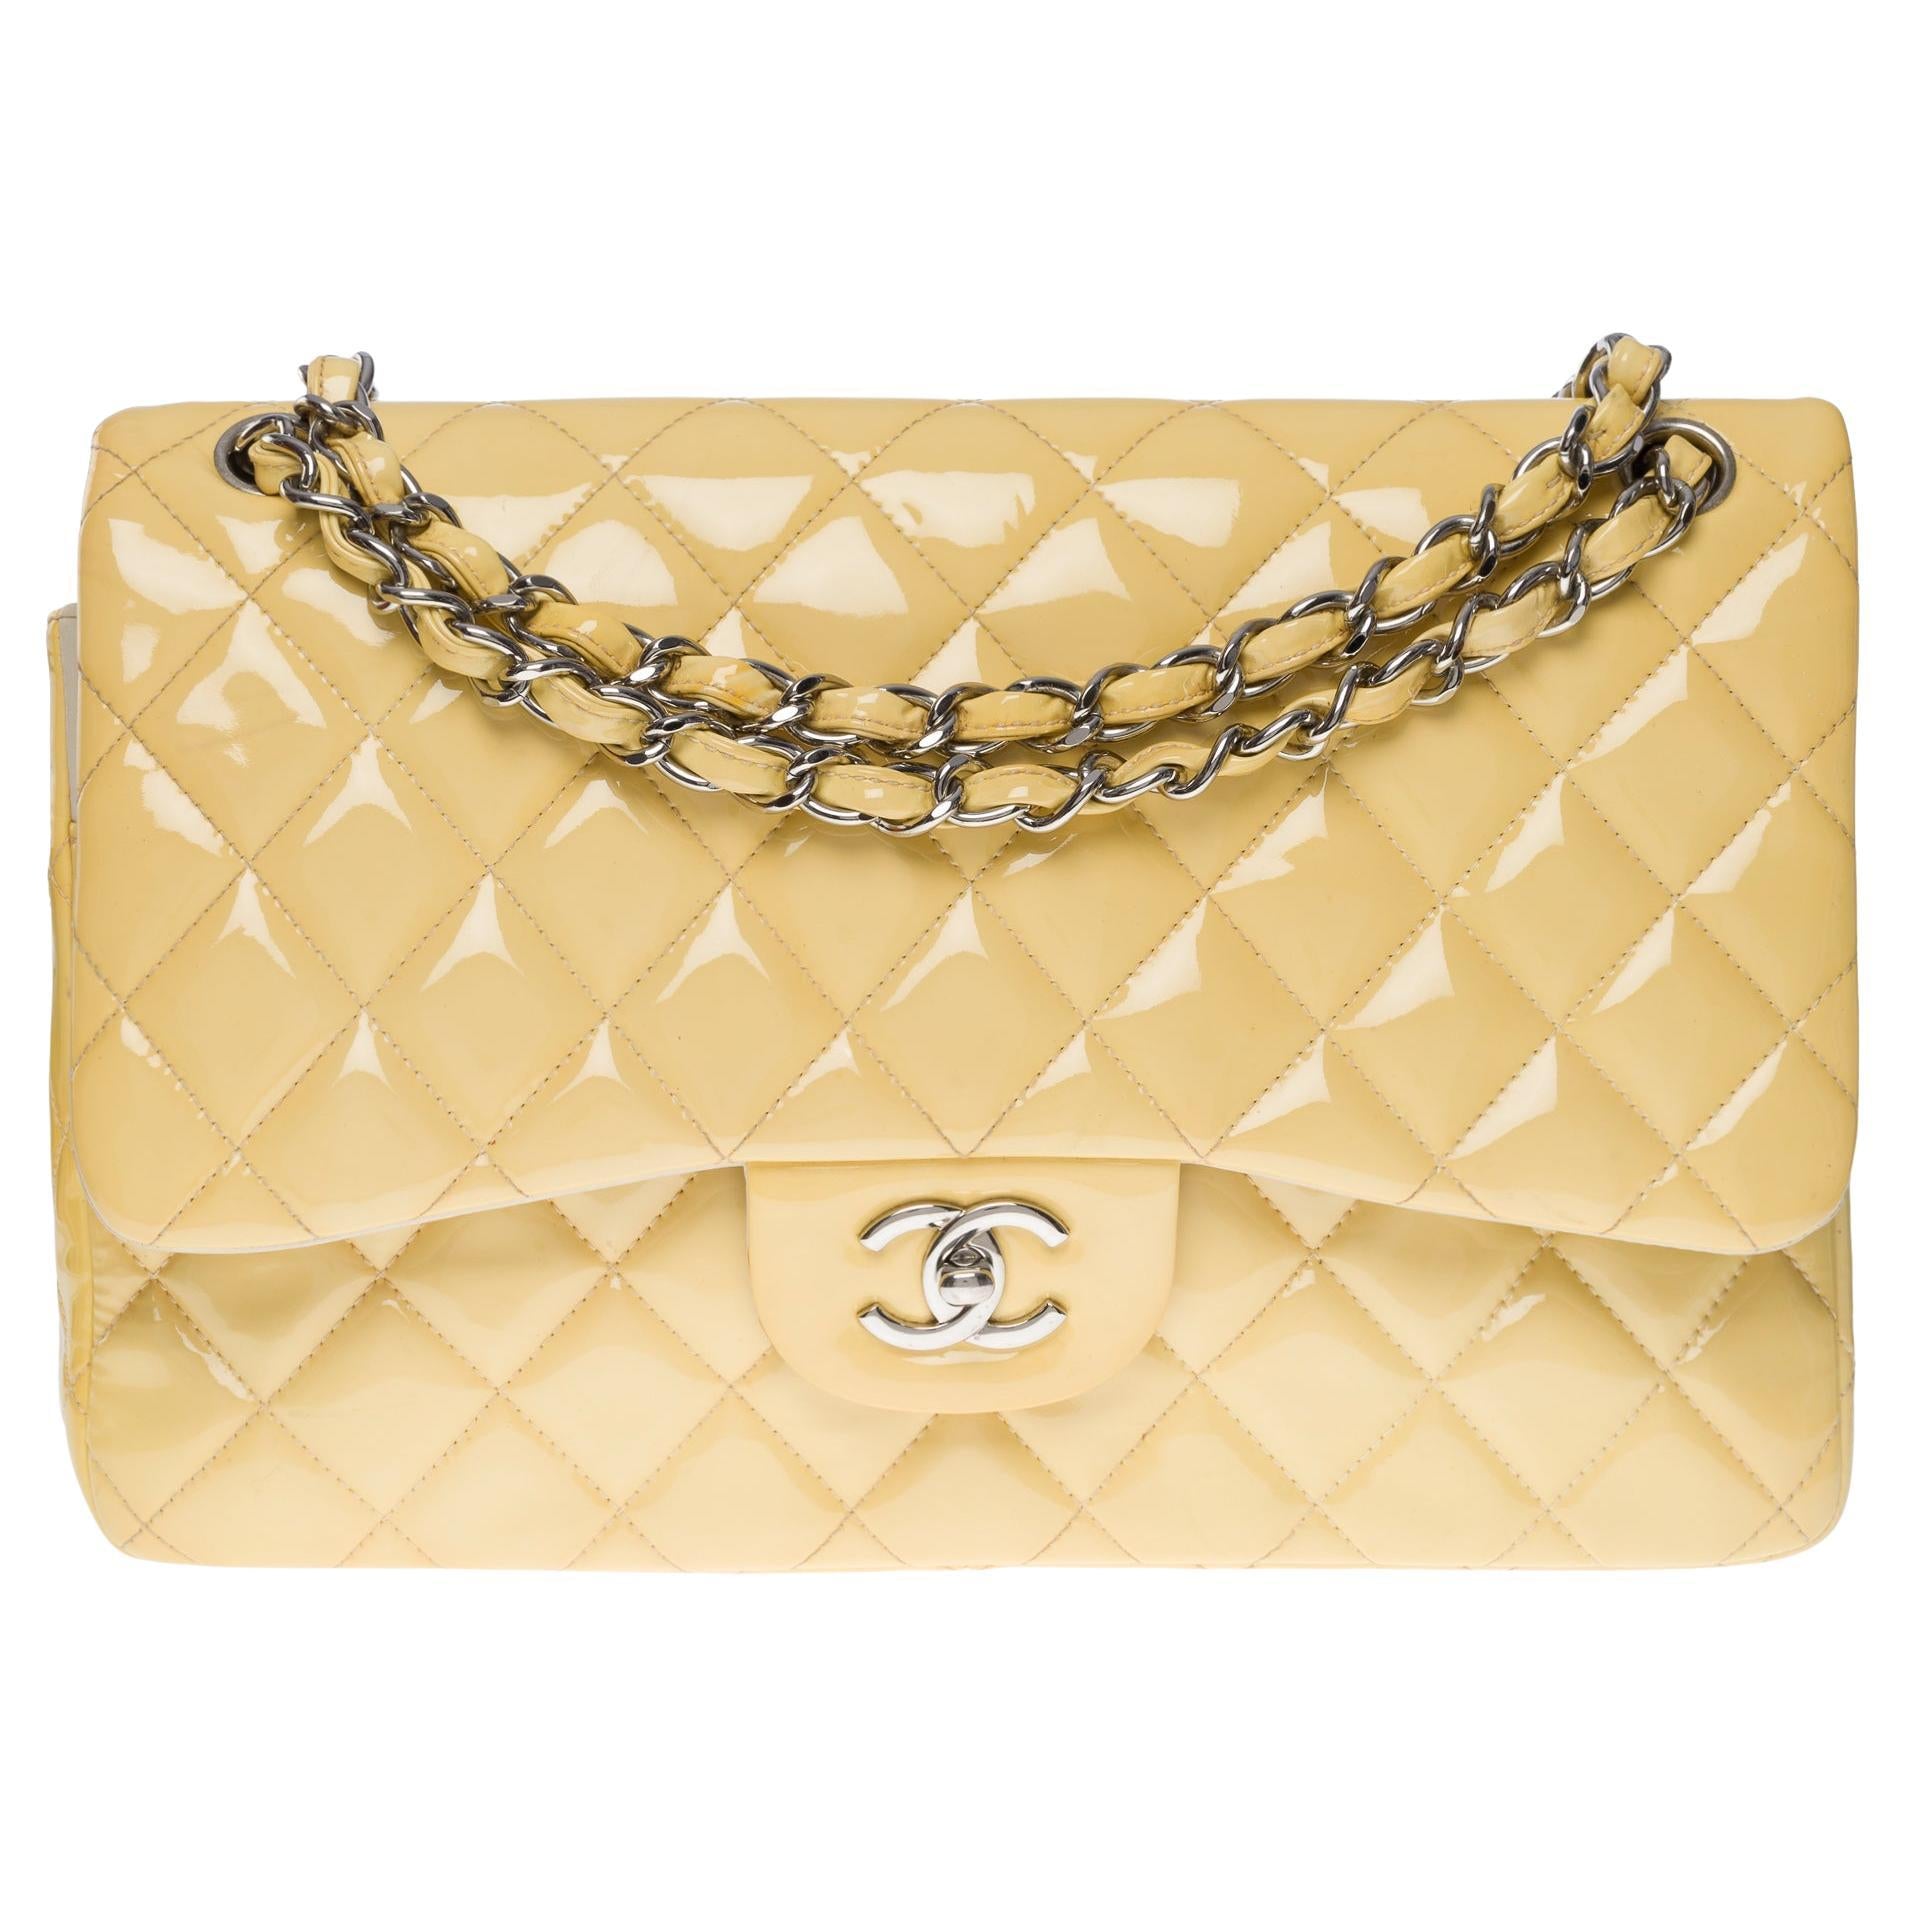 CHANEL Timeless Jumbo double flap shoulder bag in yellow patent leathe